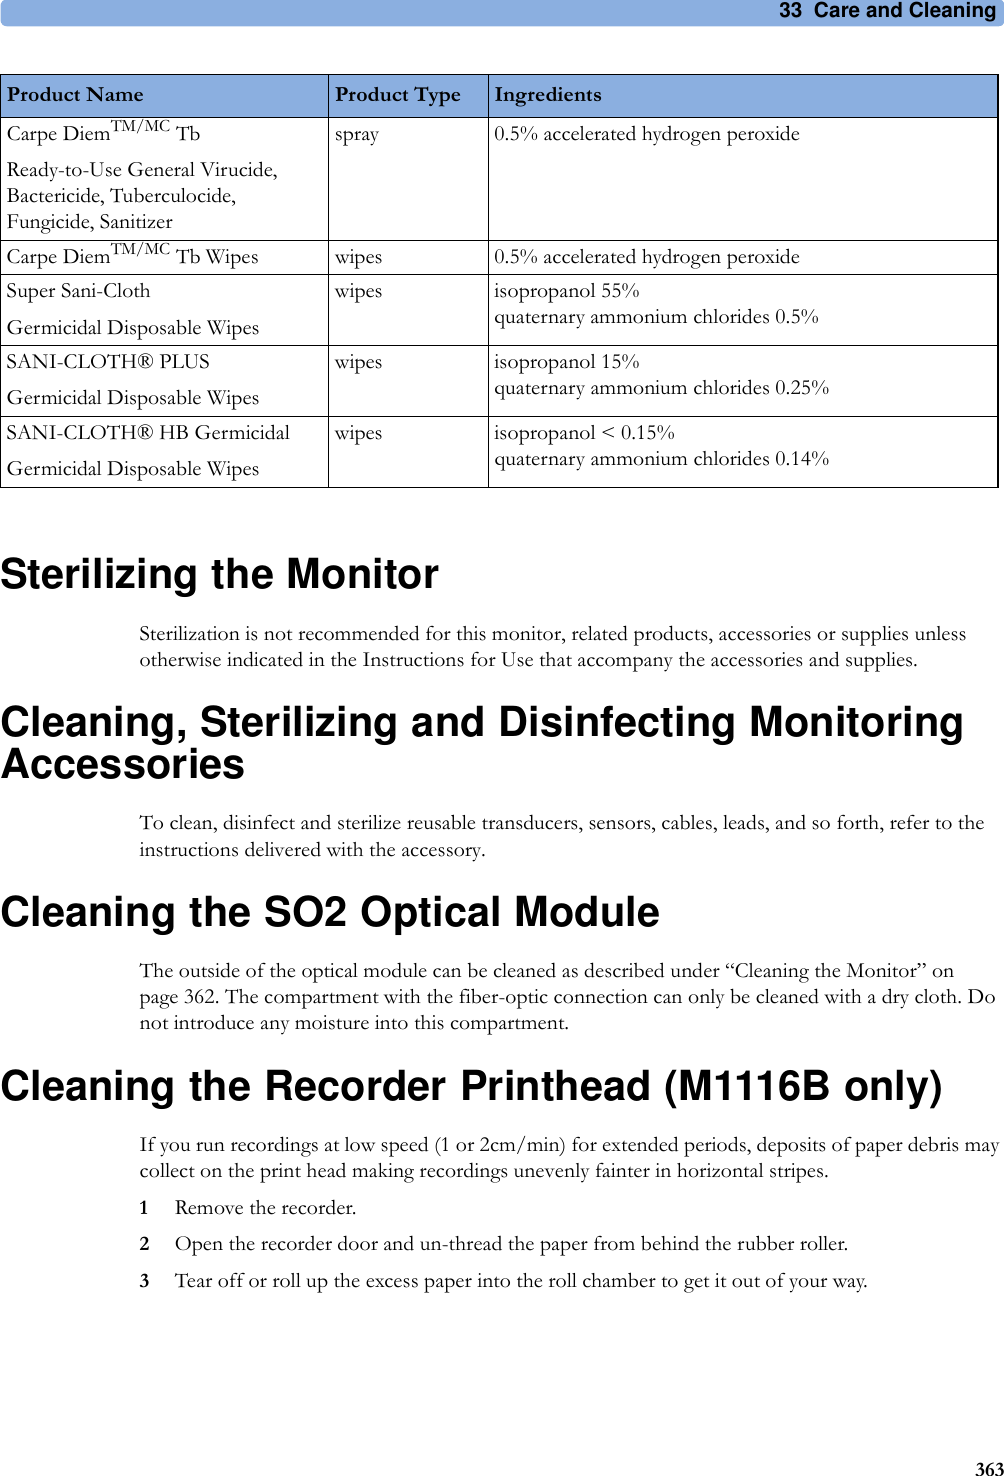 33 Care and Cleaning363Sterilizing the MonitorSterilization is not recommended for this monitor, related products, accessories or supplies unless otherwise indicated in the Instructions for Use that accompany the accessories and supplies.Cleaning, Sterilizing and Disinfecting Monitoring AccessoriesTo clean, disinfect and sterilize reusable transducers, sensors, cables, leads, and so forth, refer to the instructions delivered with the accessory.Cleaning the SO2 Optical ModuleThe outside of the optical module can be cleaned as described under “Cleaning the Monitor” on page 362. The compartment with the fiber-optic connection can only be cleaned with a dry cloth. Do not introduce any moisture into this compartment.Cleaning the Recorder Printhead (M1116B only)If you run recordings at low speed (1 or 2cm/min) for extended periods, deposits of paper debris may collect on the print head making recordings unevenly fainter in horizontal stripes.1Remove the recorder.2Open the recorder door and un-thread the paper from behind the rubber roller.3Tear off or roll up the excess paper into the roll chamber to get it out of your way.Carpe DiemTM/MC TbReady-to-Use General Virucide, Bactericide, Tuberculocide, Fungicide, Sanitizerspray 0.5% accelerated hydrogen peroxideCarpe DiemTM/MC Tb Wipes wipes 0.5% accelerated hydrogen peroxideSuper Sani-ClothGermicidal Disposable Wipeswipes isopropanol 55%quaternary ammonium chlorides 0.5%SANI-CLOTH® PLUSGermicidal Disposable Wipeswipes isopropanol 15%quaternary ammonium chlorides 0.25%SANI-CLOTH® HB GermicidalGermicidal Disposable Wipeswipes isopropanol &lt; 0.15%quaternary ammonium chlorides 0.14%Product Name Product Type Ingredients